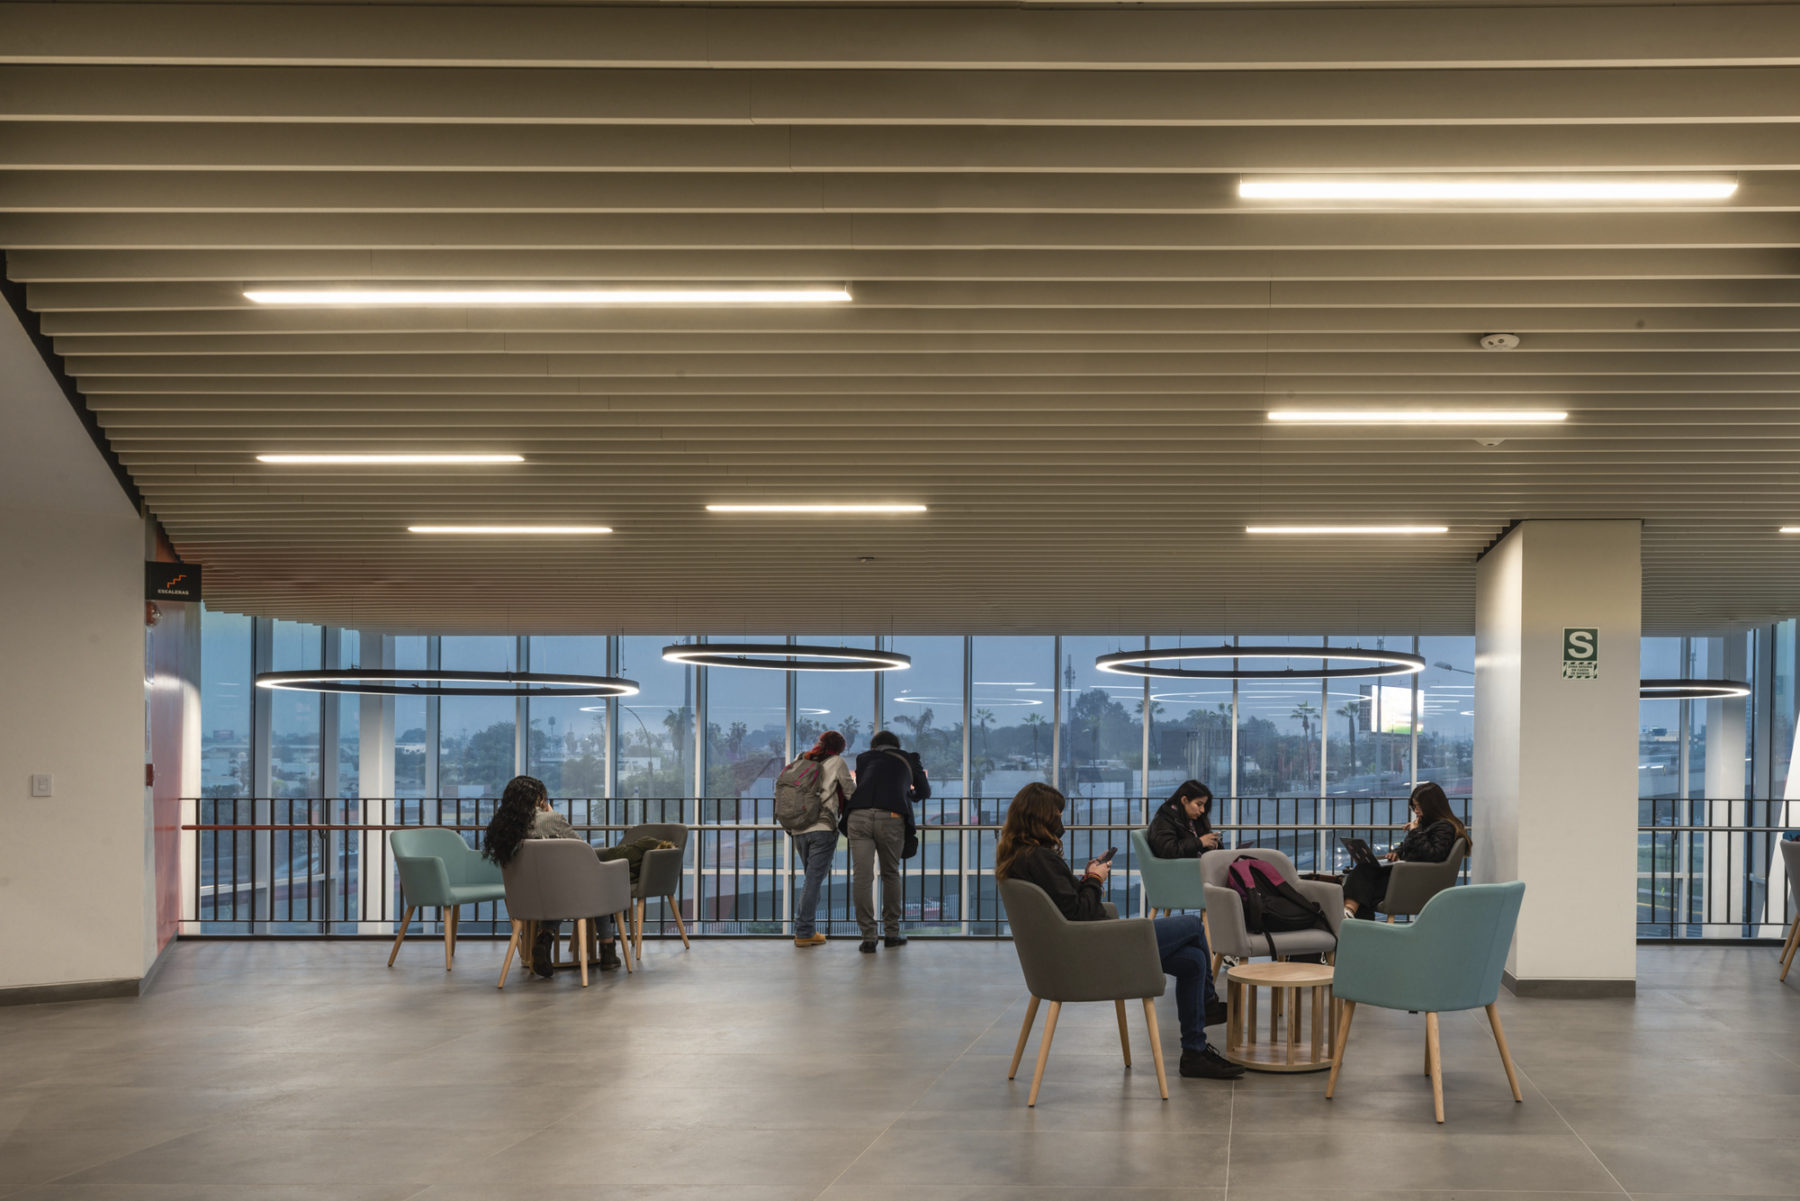 interior photo of student overlook area with students sitting in soft seating,, illuminated by lights embedded in a wood slat ceiling